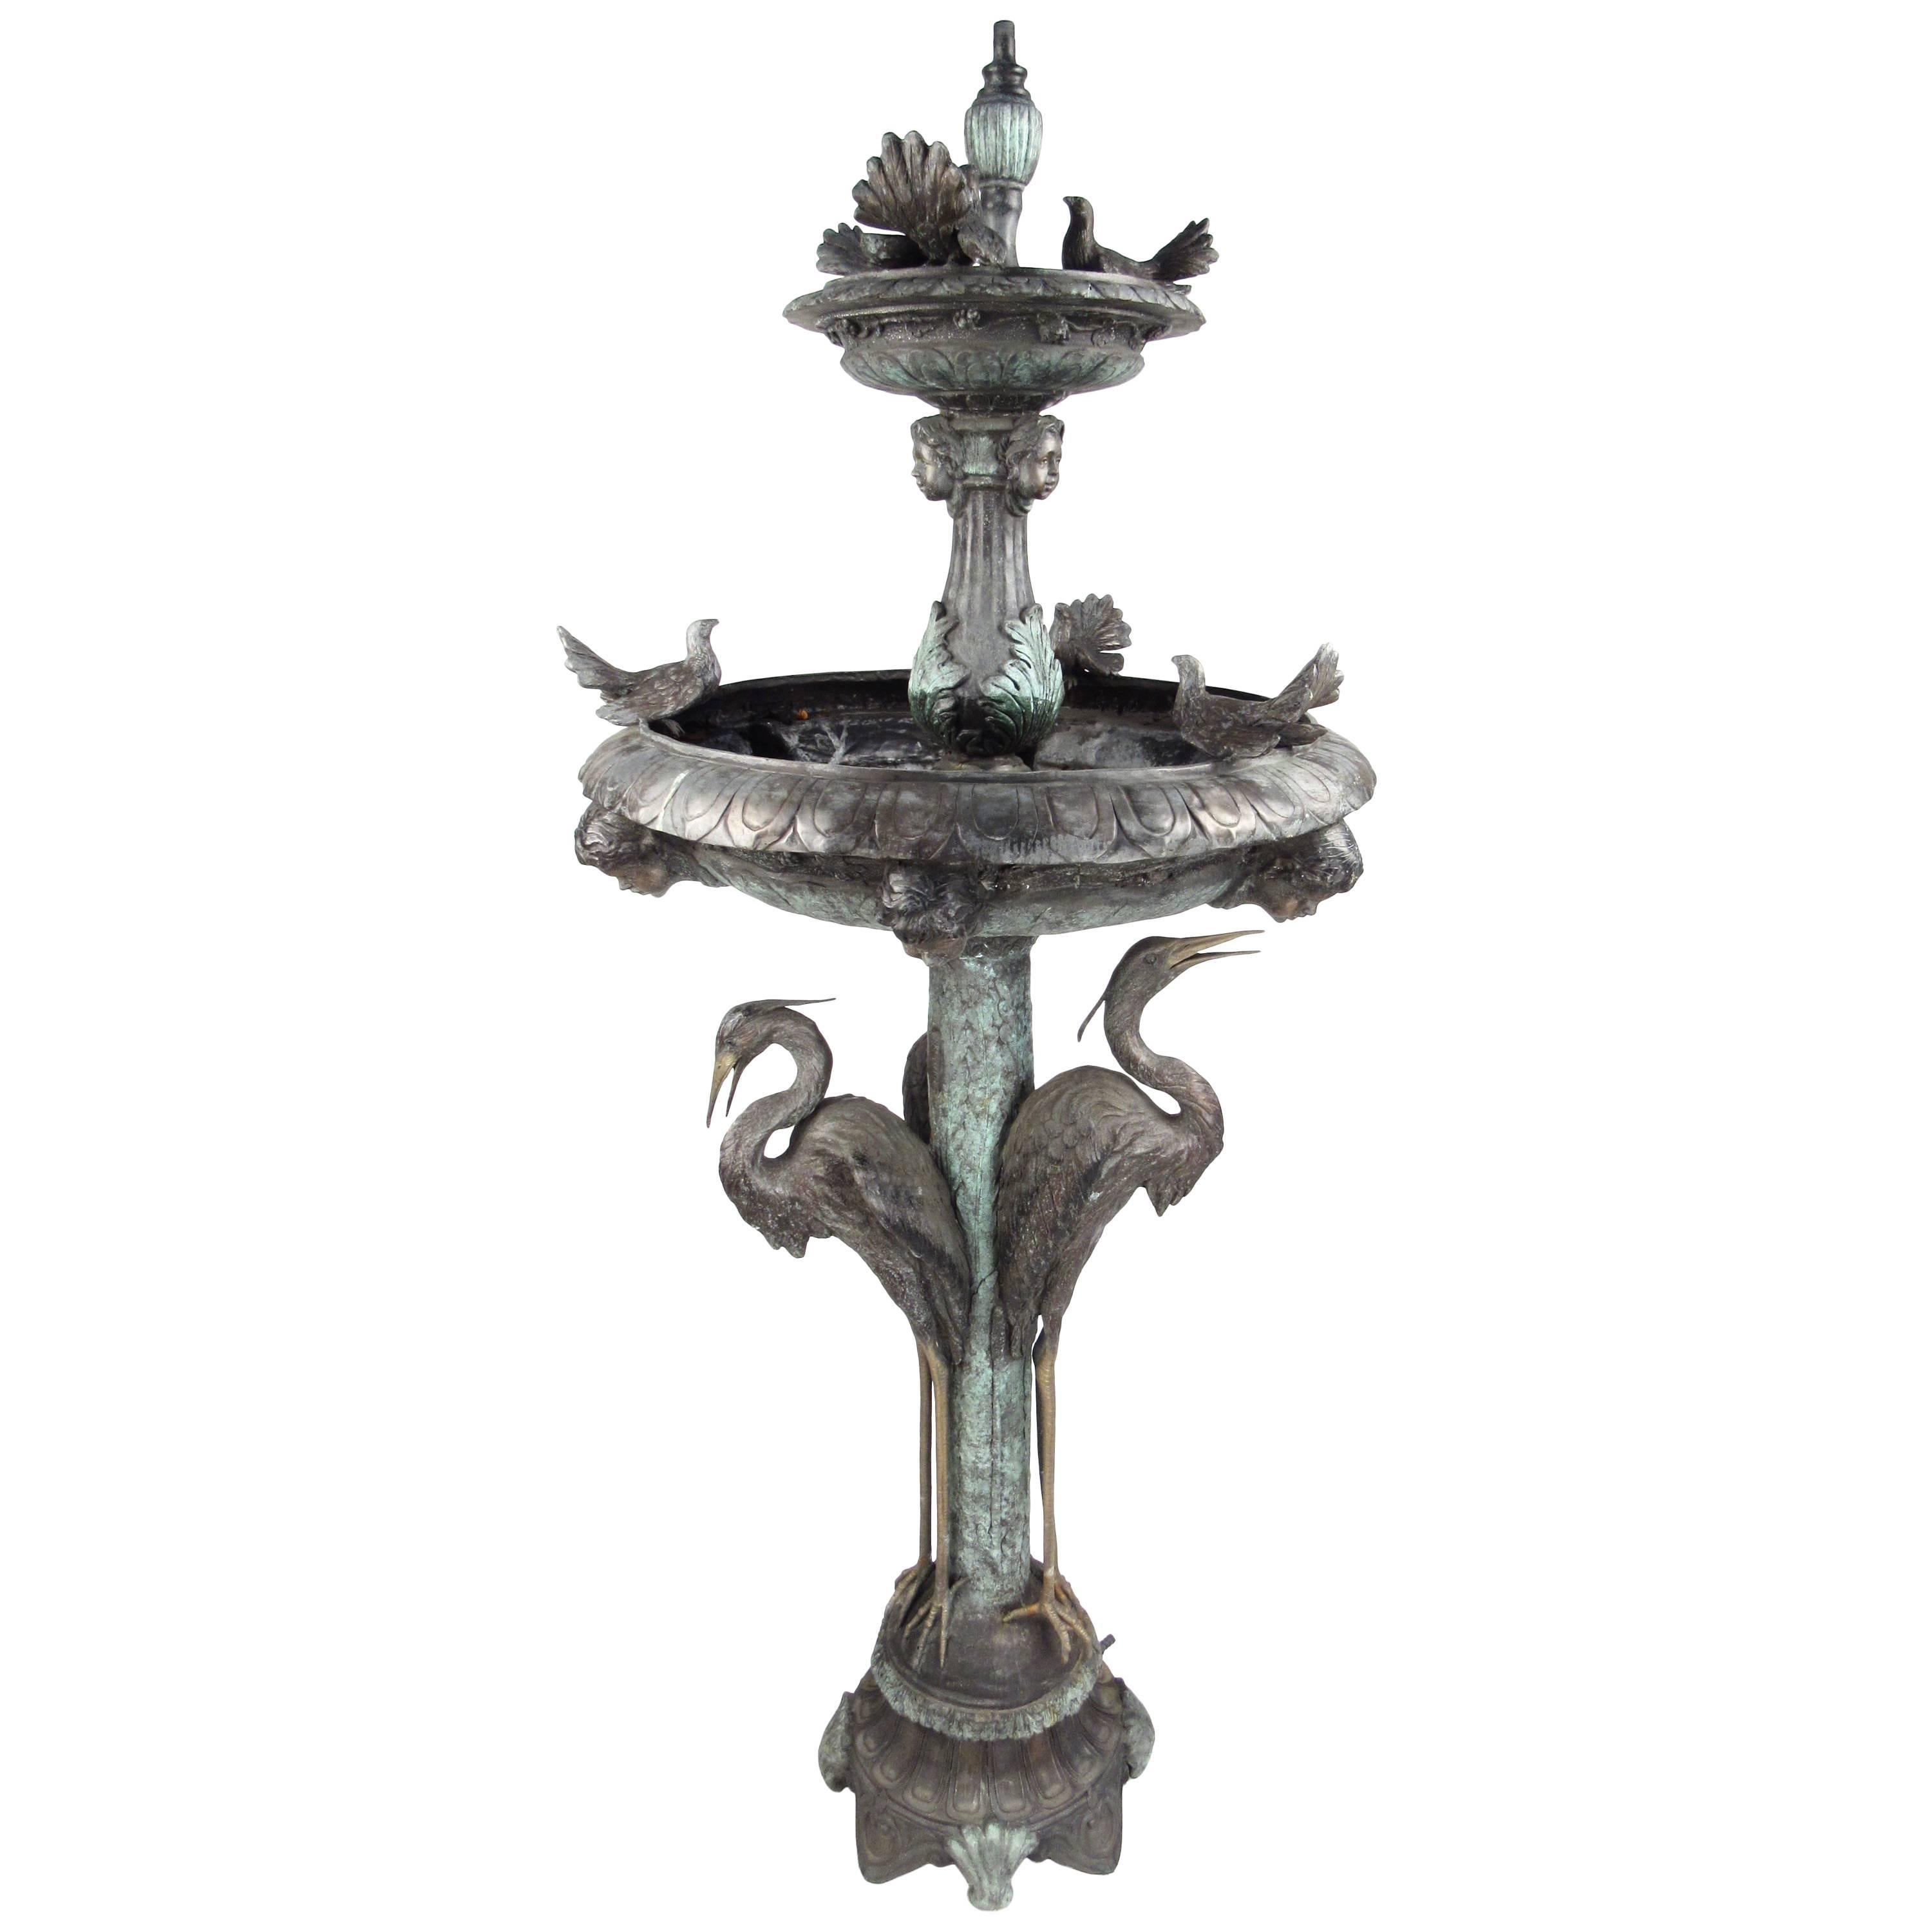 Spectacular Two-Tier Bronze Garden Fountain with Water Feature